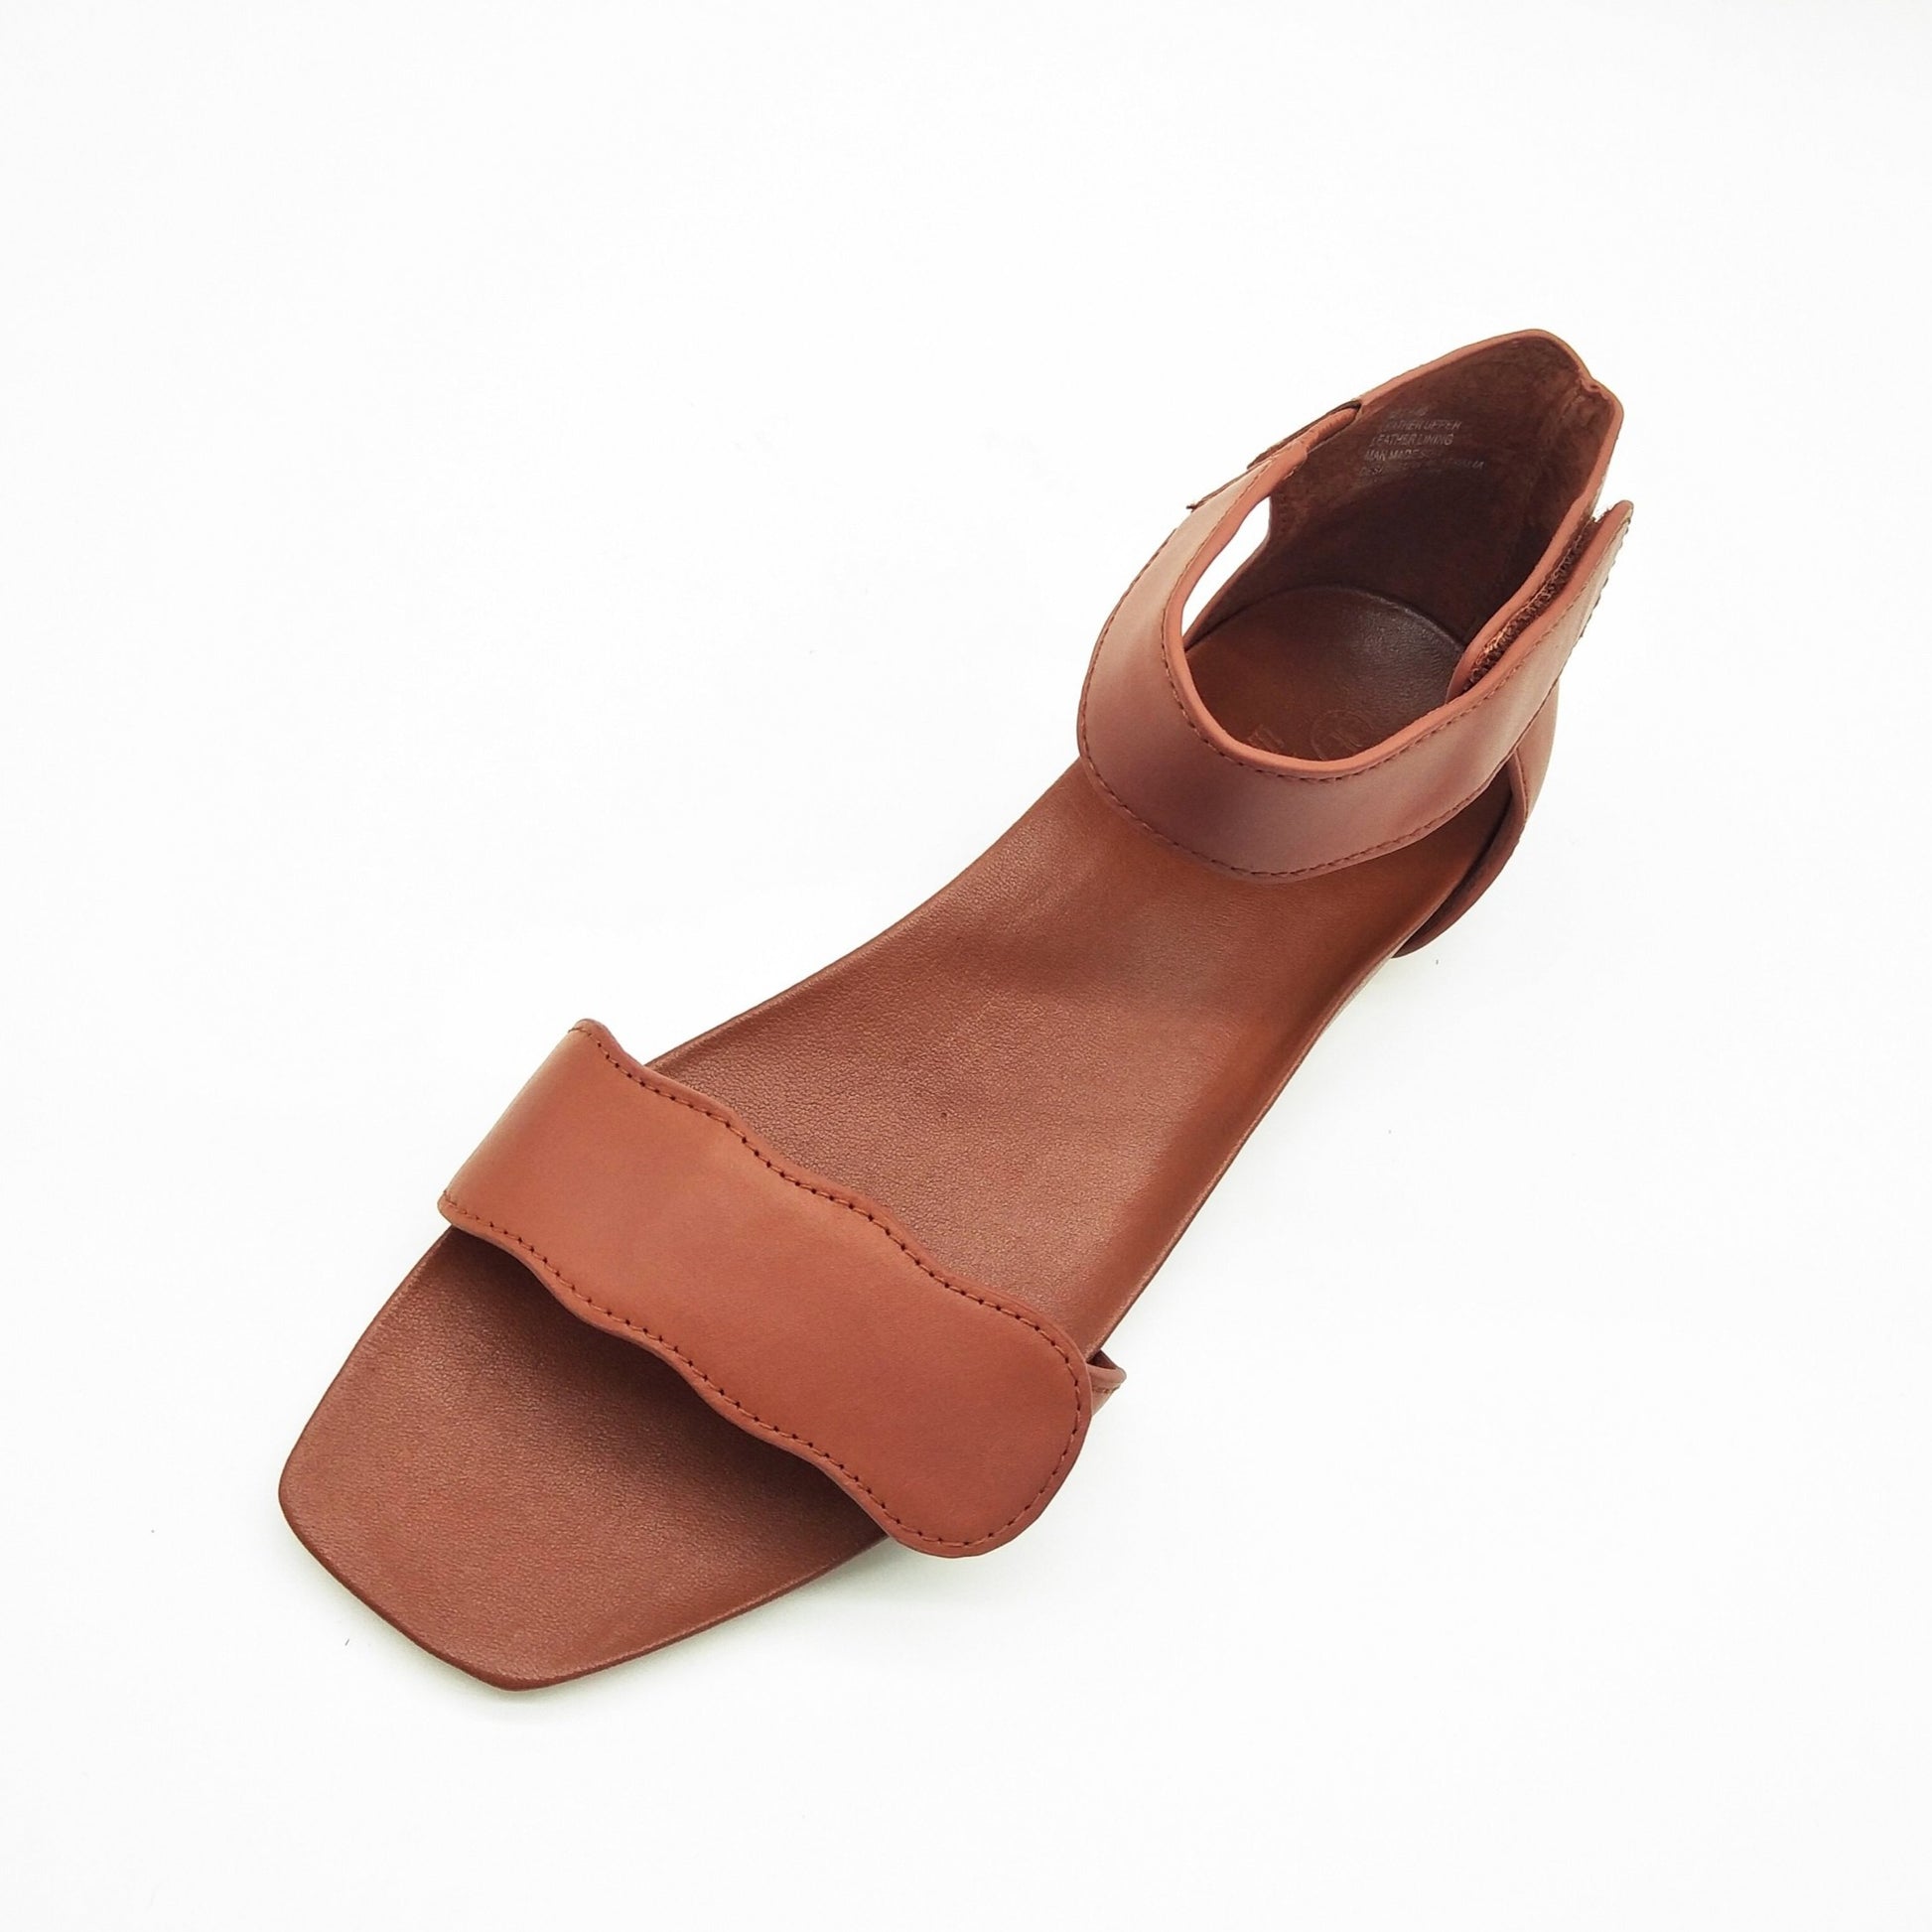 Light-weight Tan leather sandals with adjustable strapes and arch support. Bio-contoured footbed, wide feet friendly